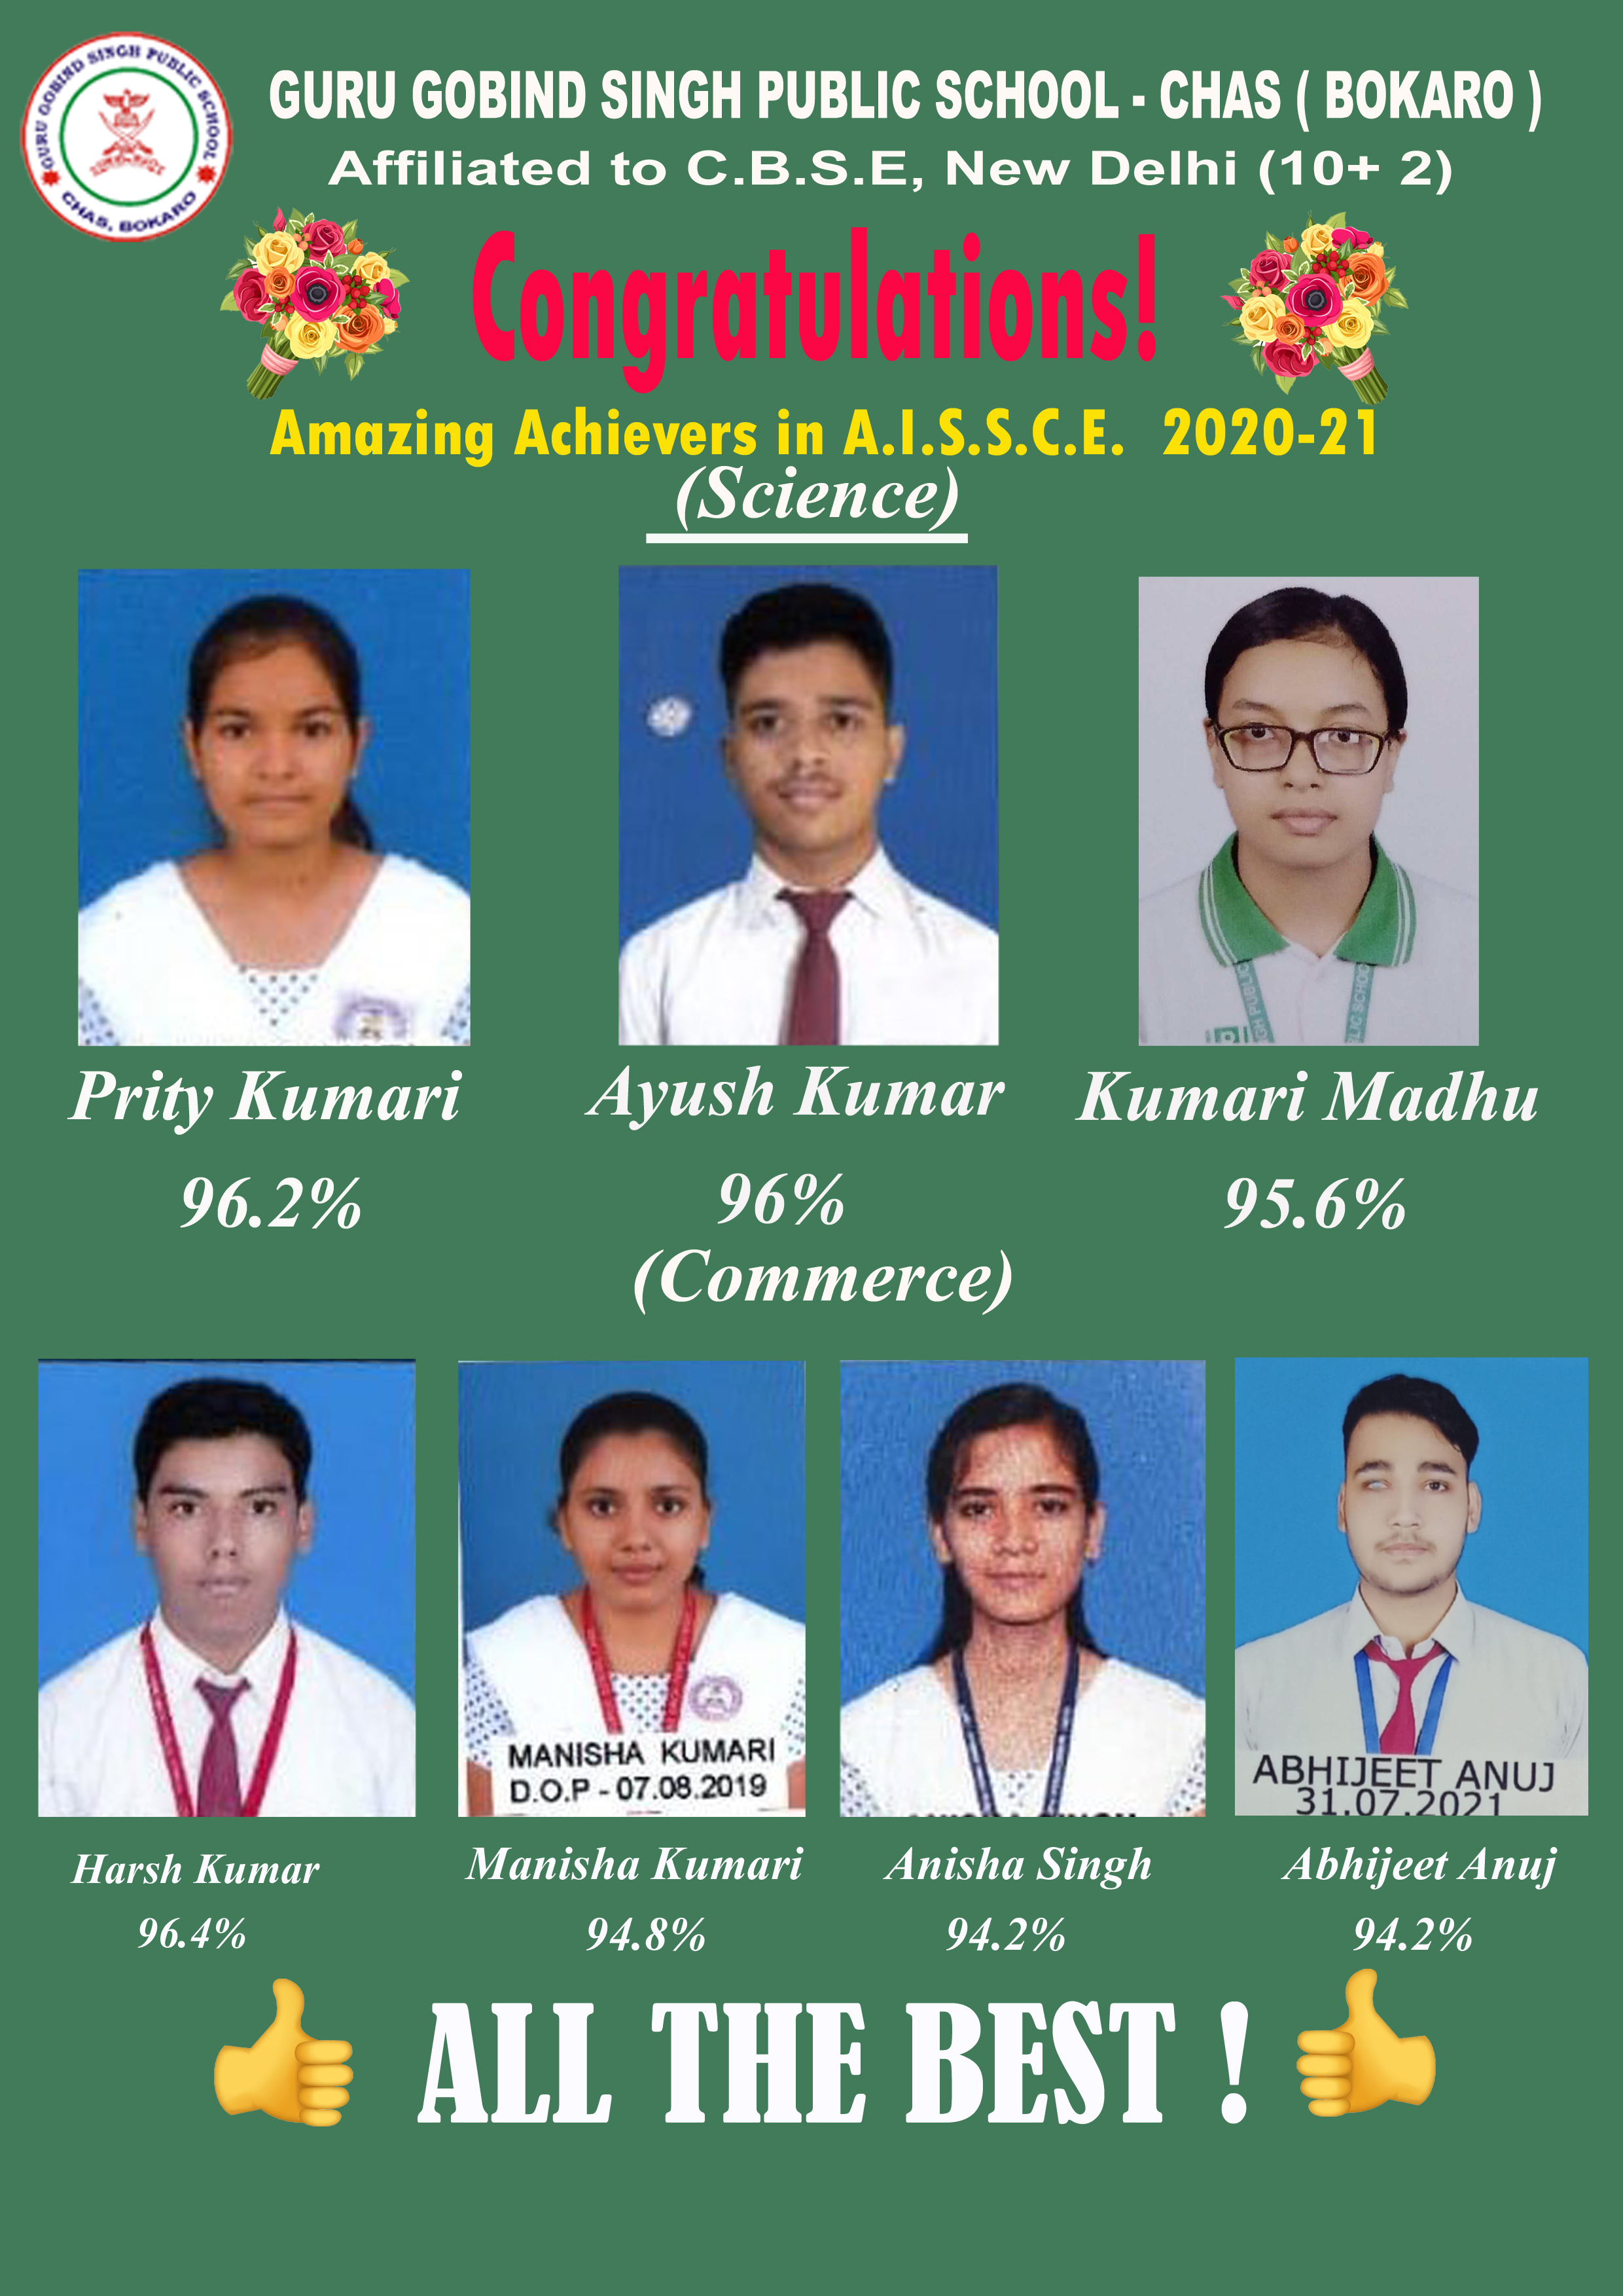 Felicitation of Class X And XII Toppers